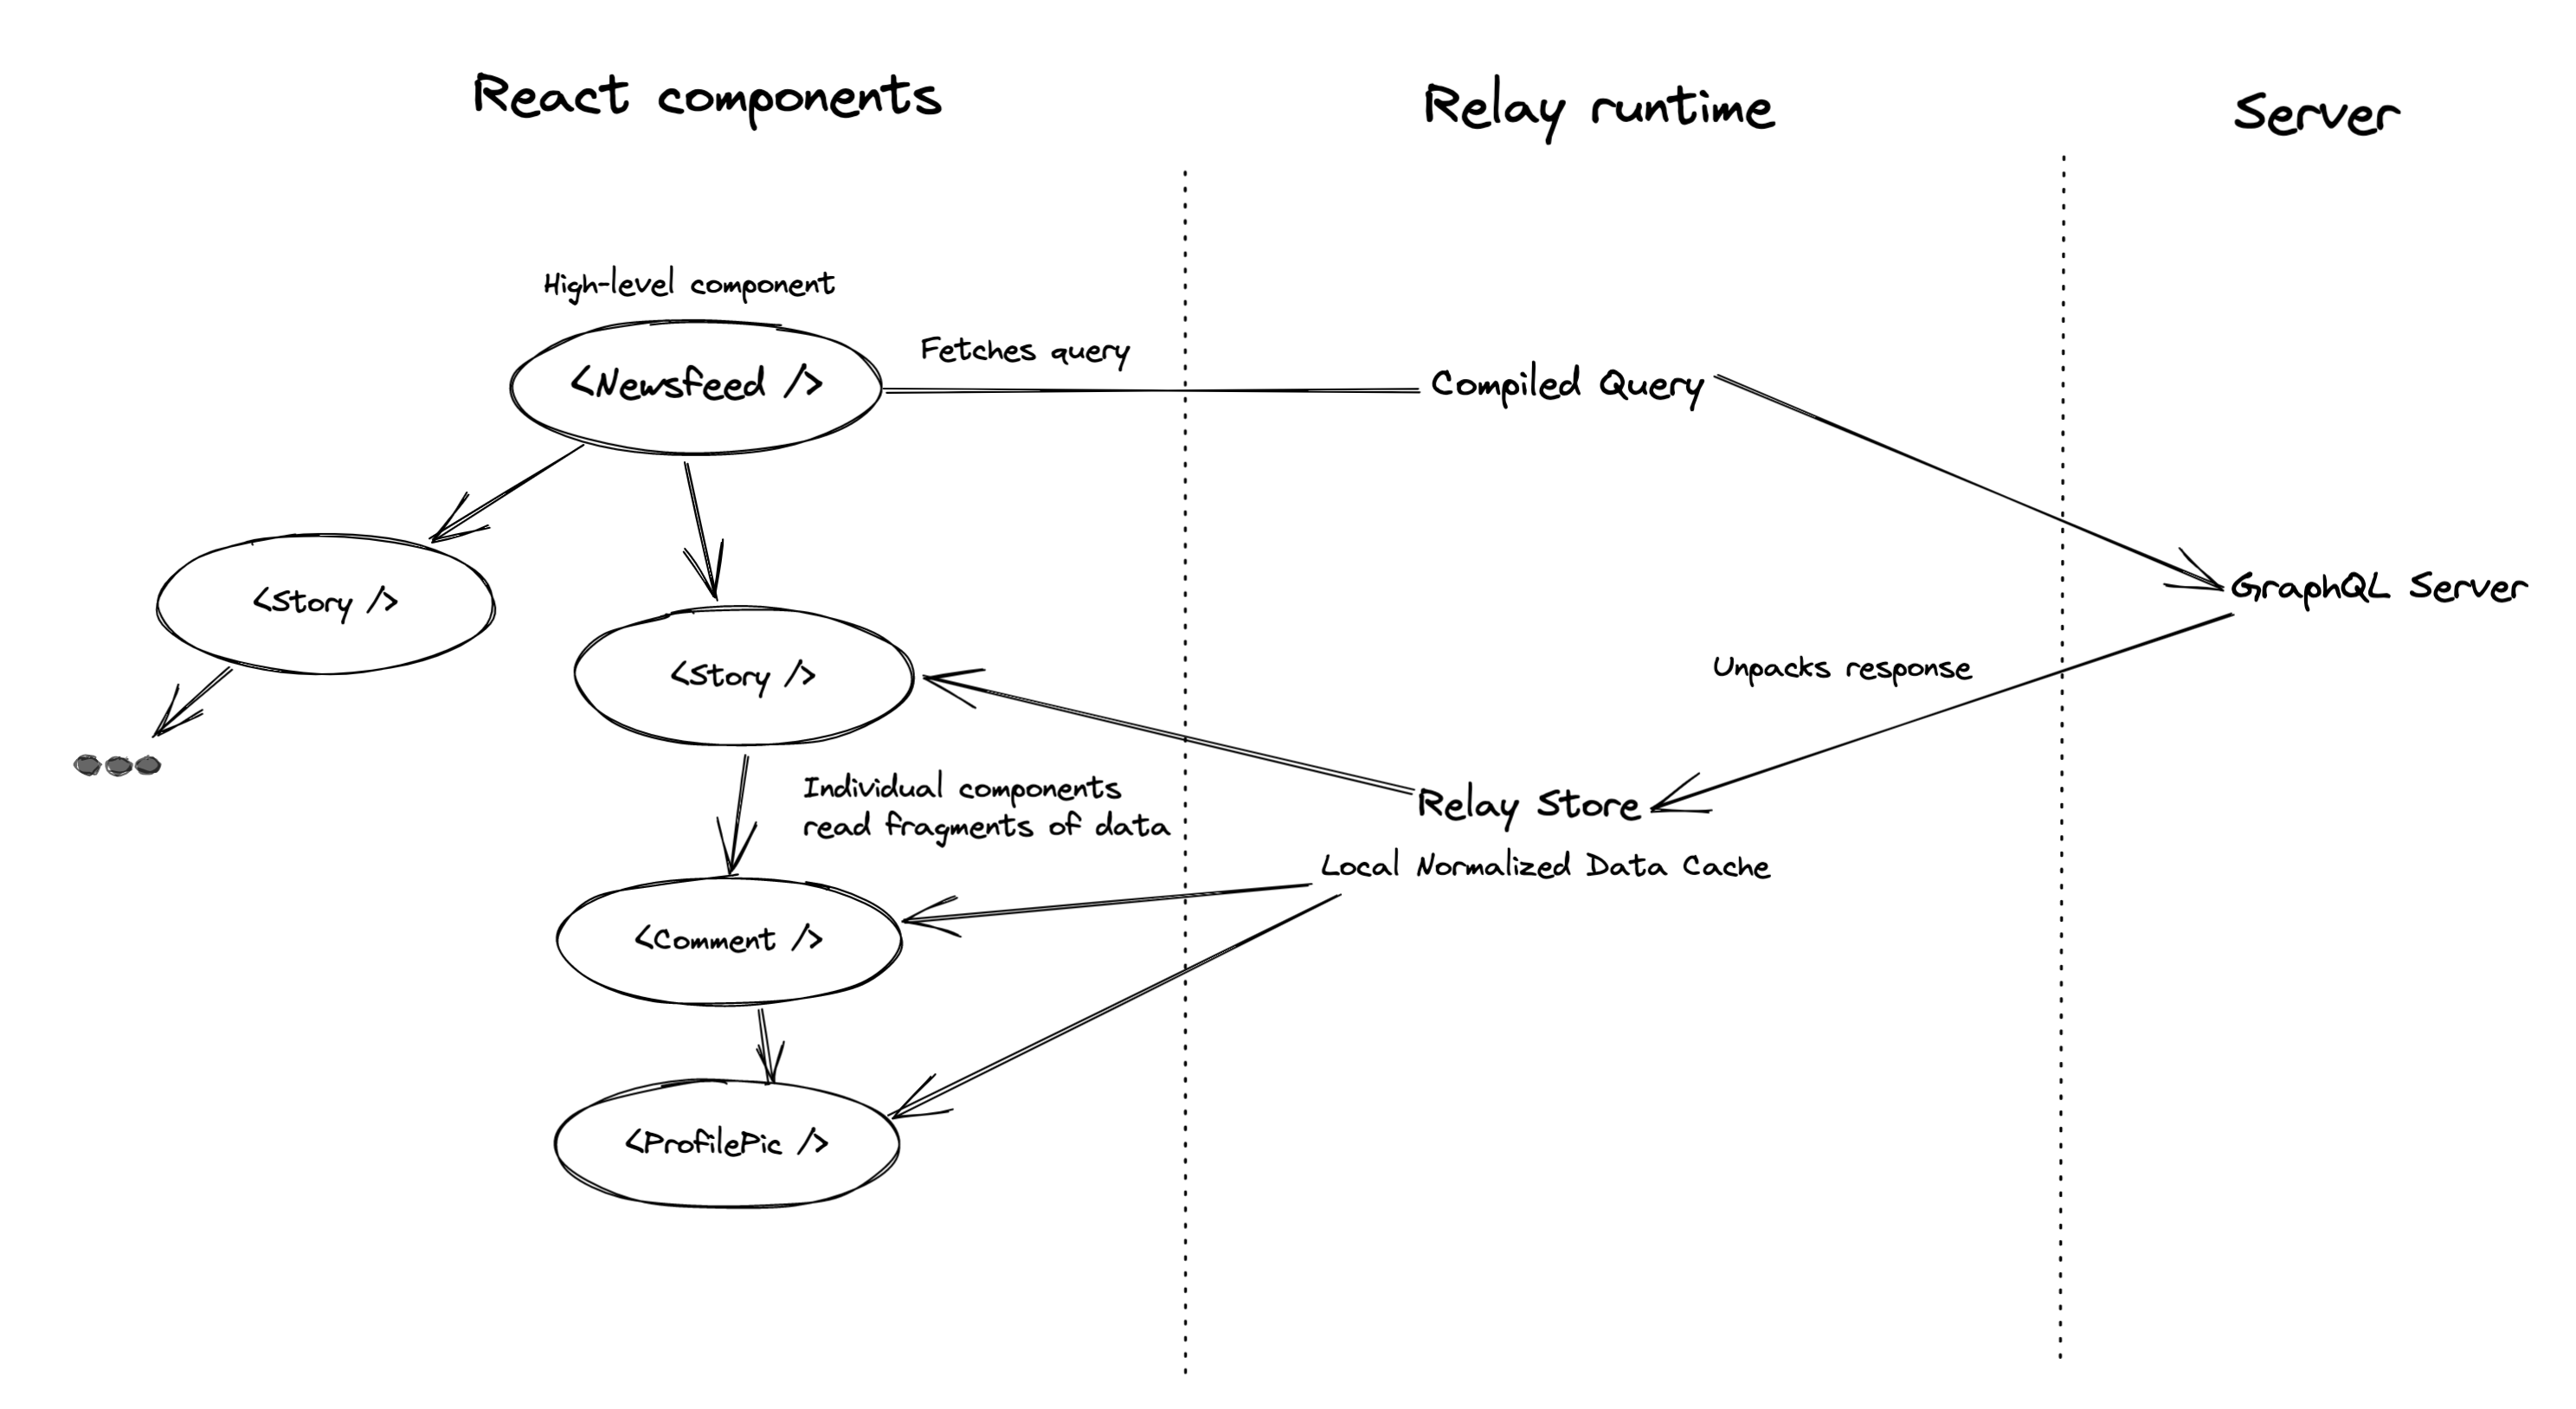 The Relay Runtime fetches the query and vends out the appropriate data to each component according to its fragment